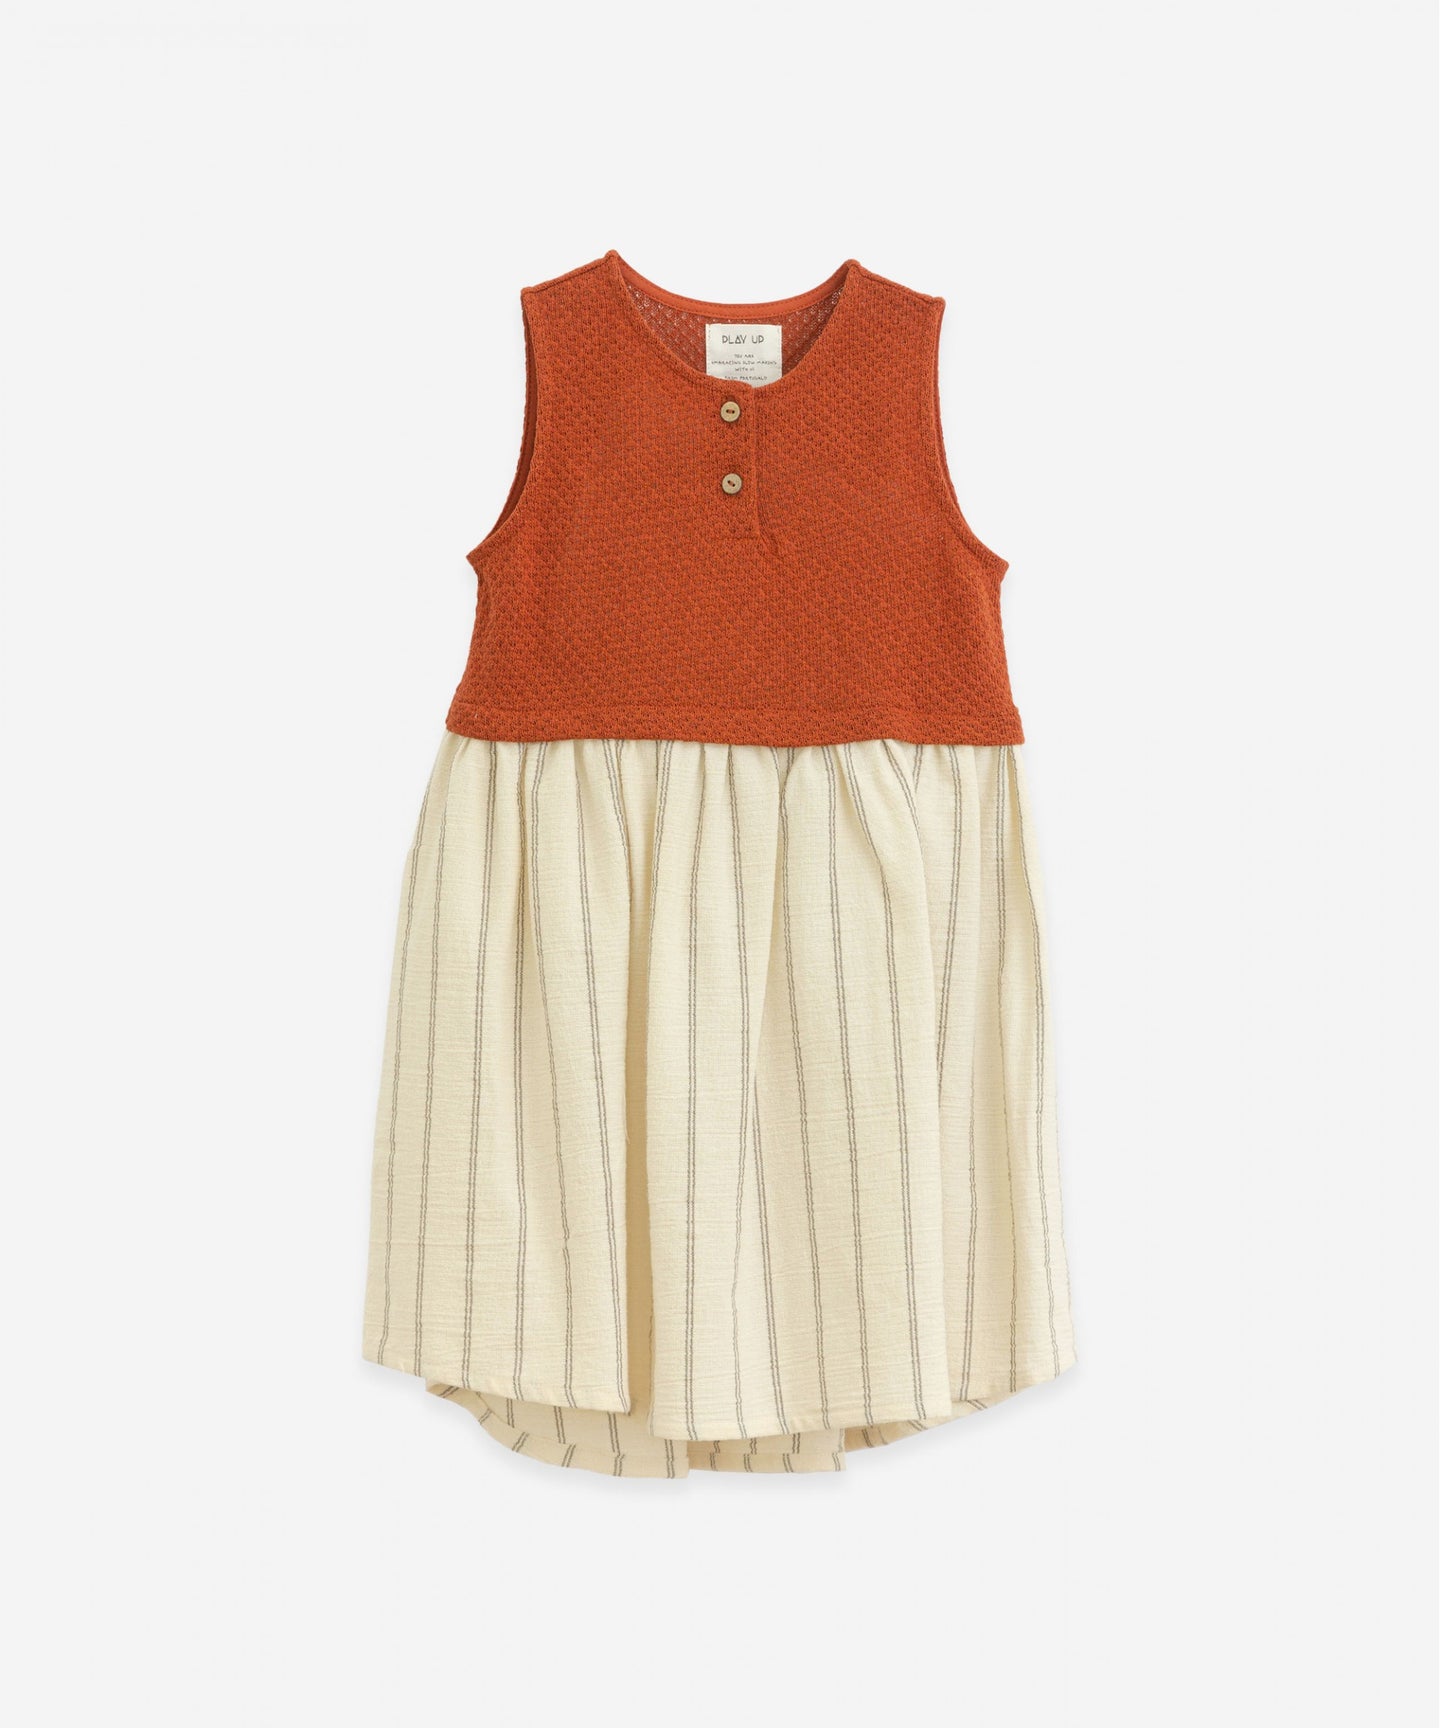 Play Up - Organic Striped Dress - Anise